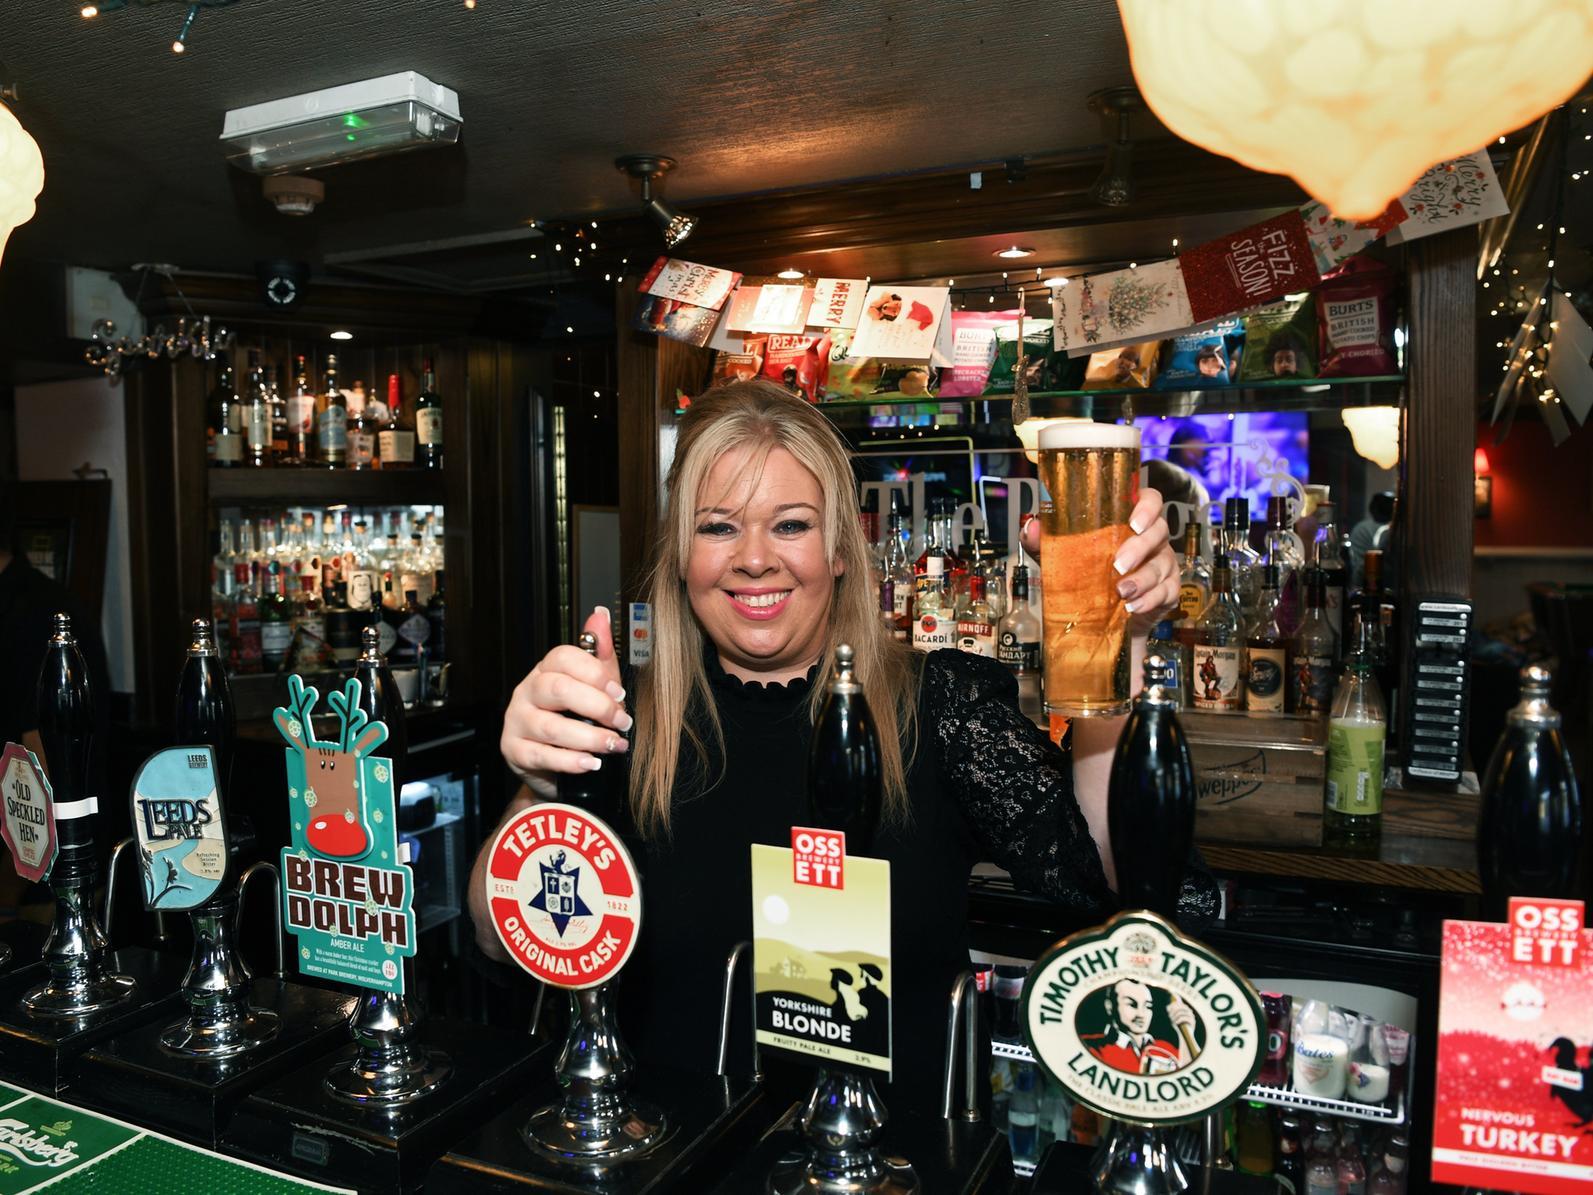 The Bridge has been in Horsforth since 1868. It has an extensive pie menu from classic Steak & Guinness, to Rabbit and a daily chef's special. Pictured is Rachel Jenkinson after winning Yorkshire Evening Post Pub of the Year.